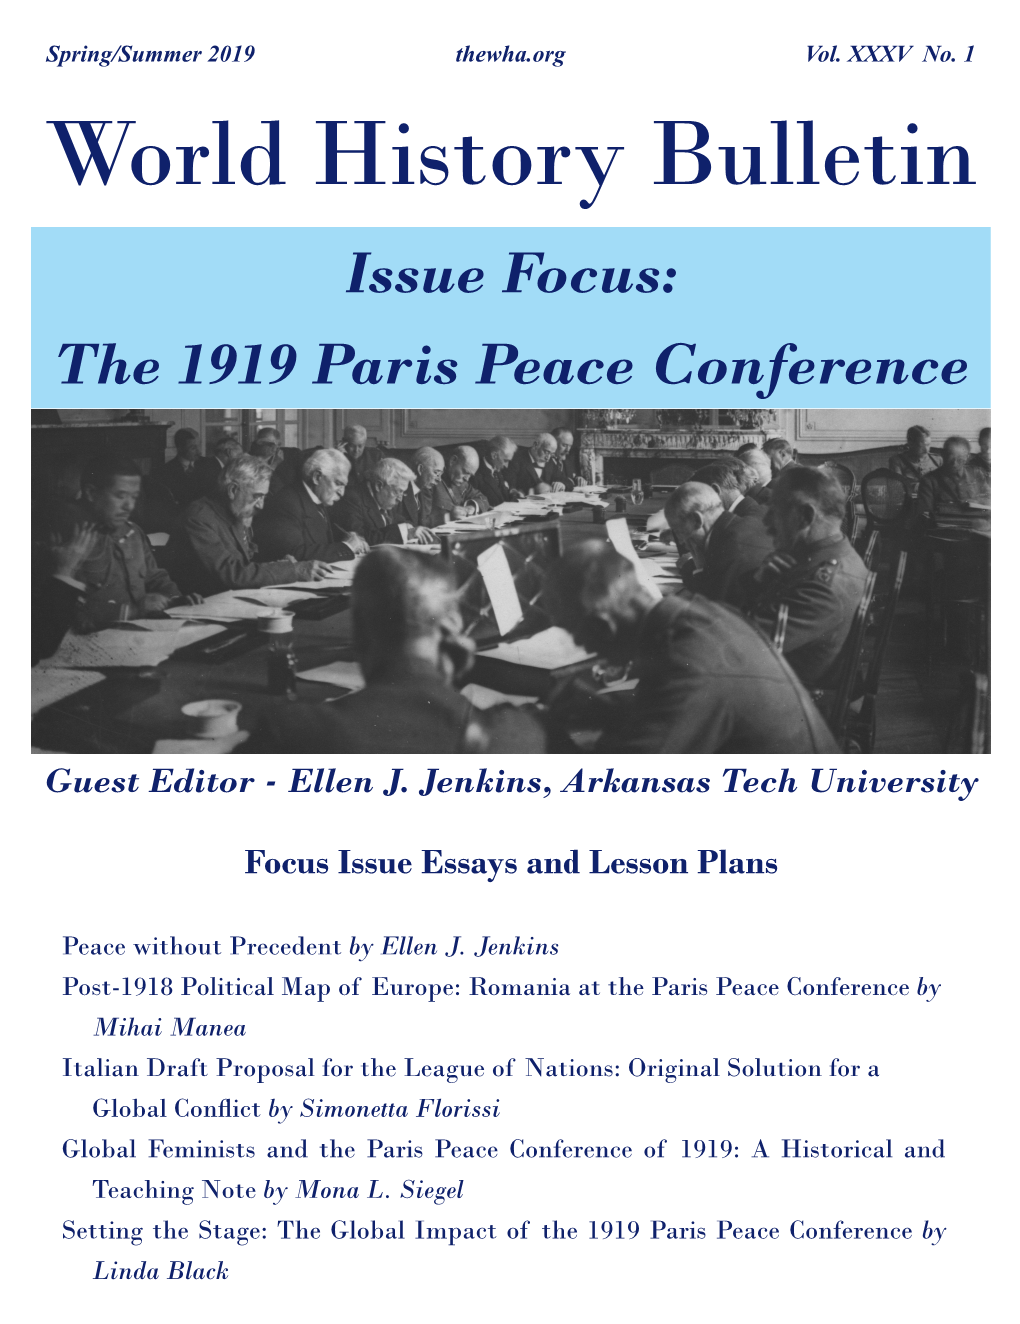 World History Bulletin Issue Focus: the 1919 Paris Peace Conference